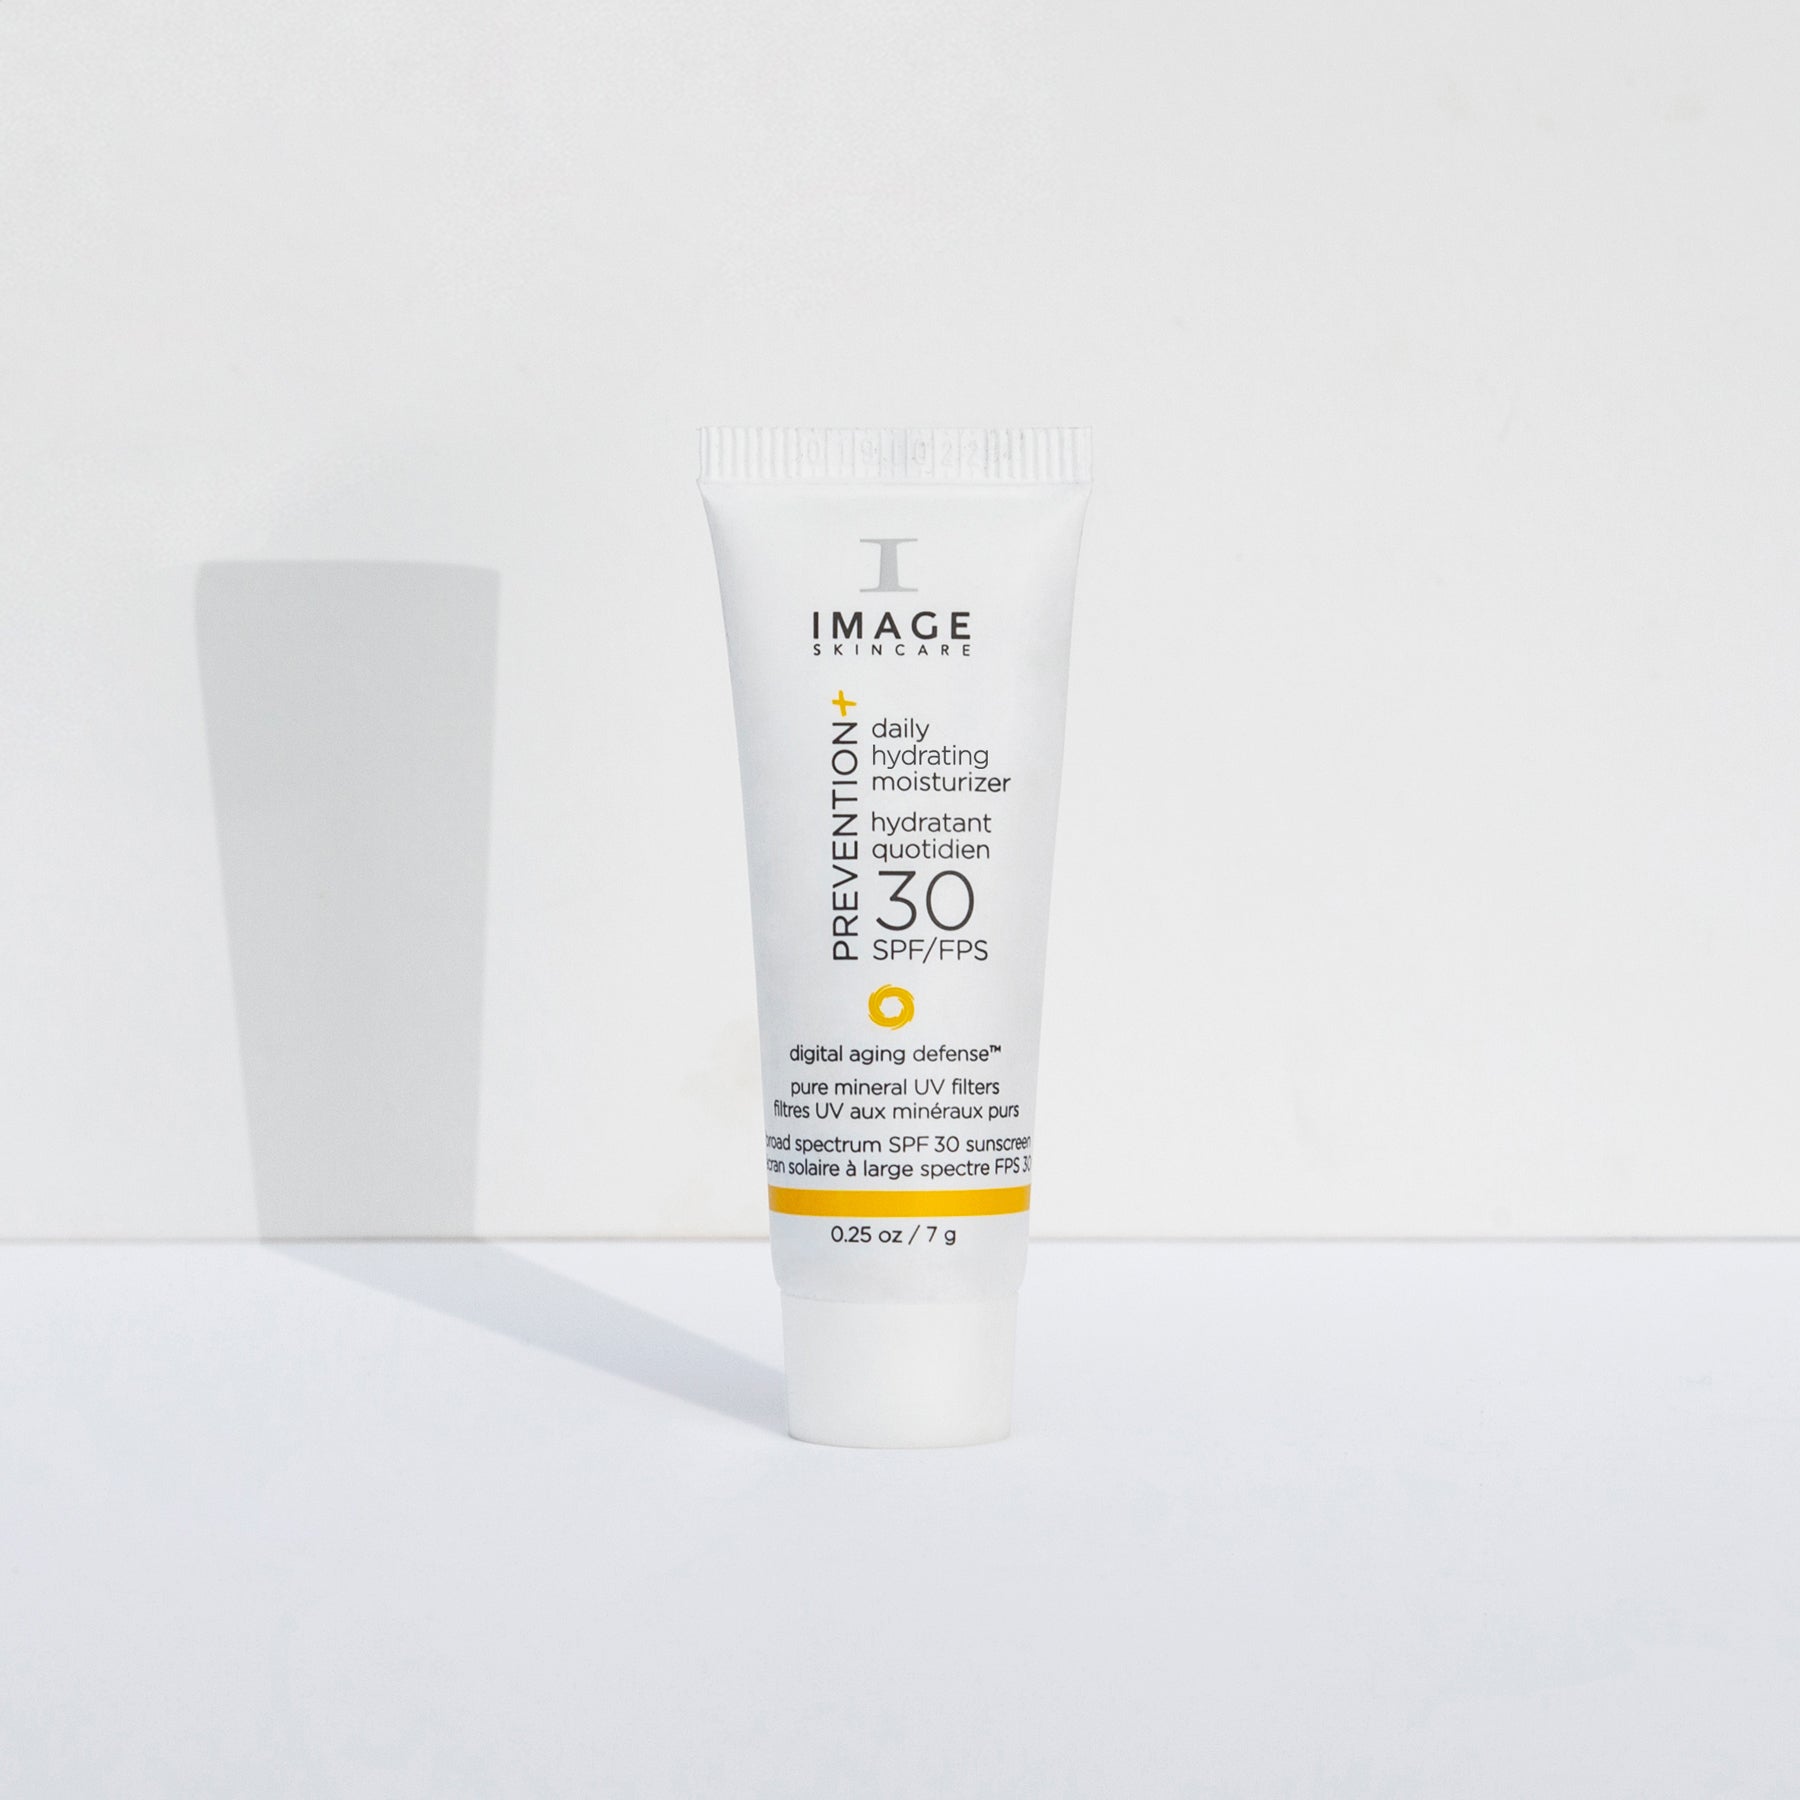 » PREVENTION+ daily hydrating moisturizer SPF 30 sample (50% off)